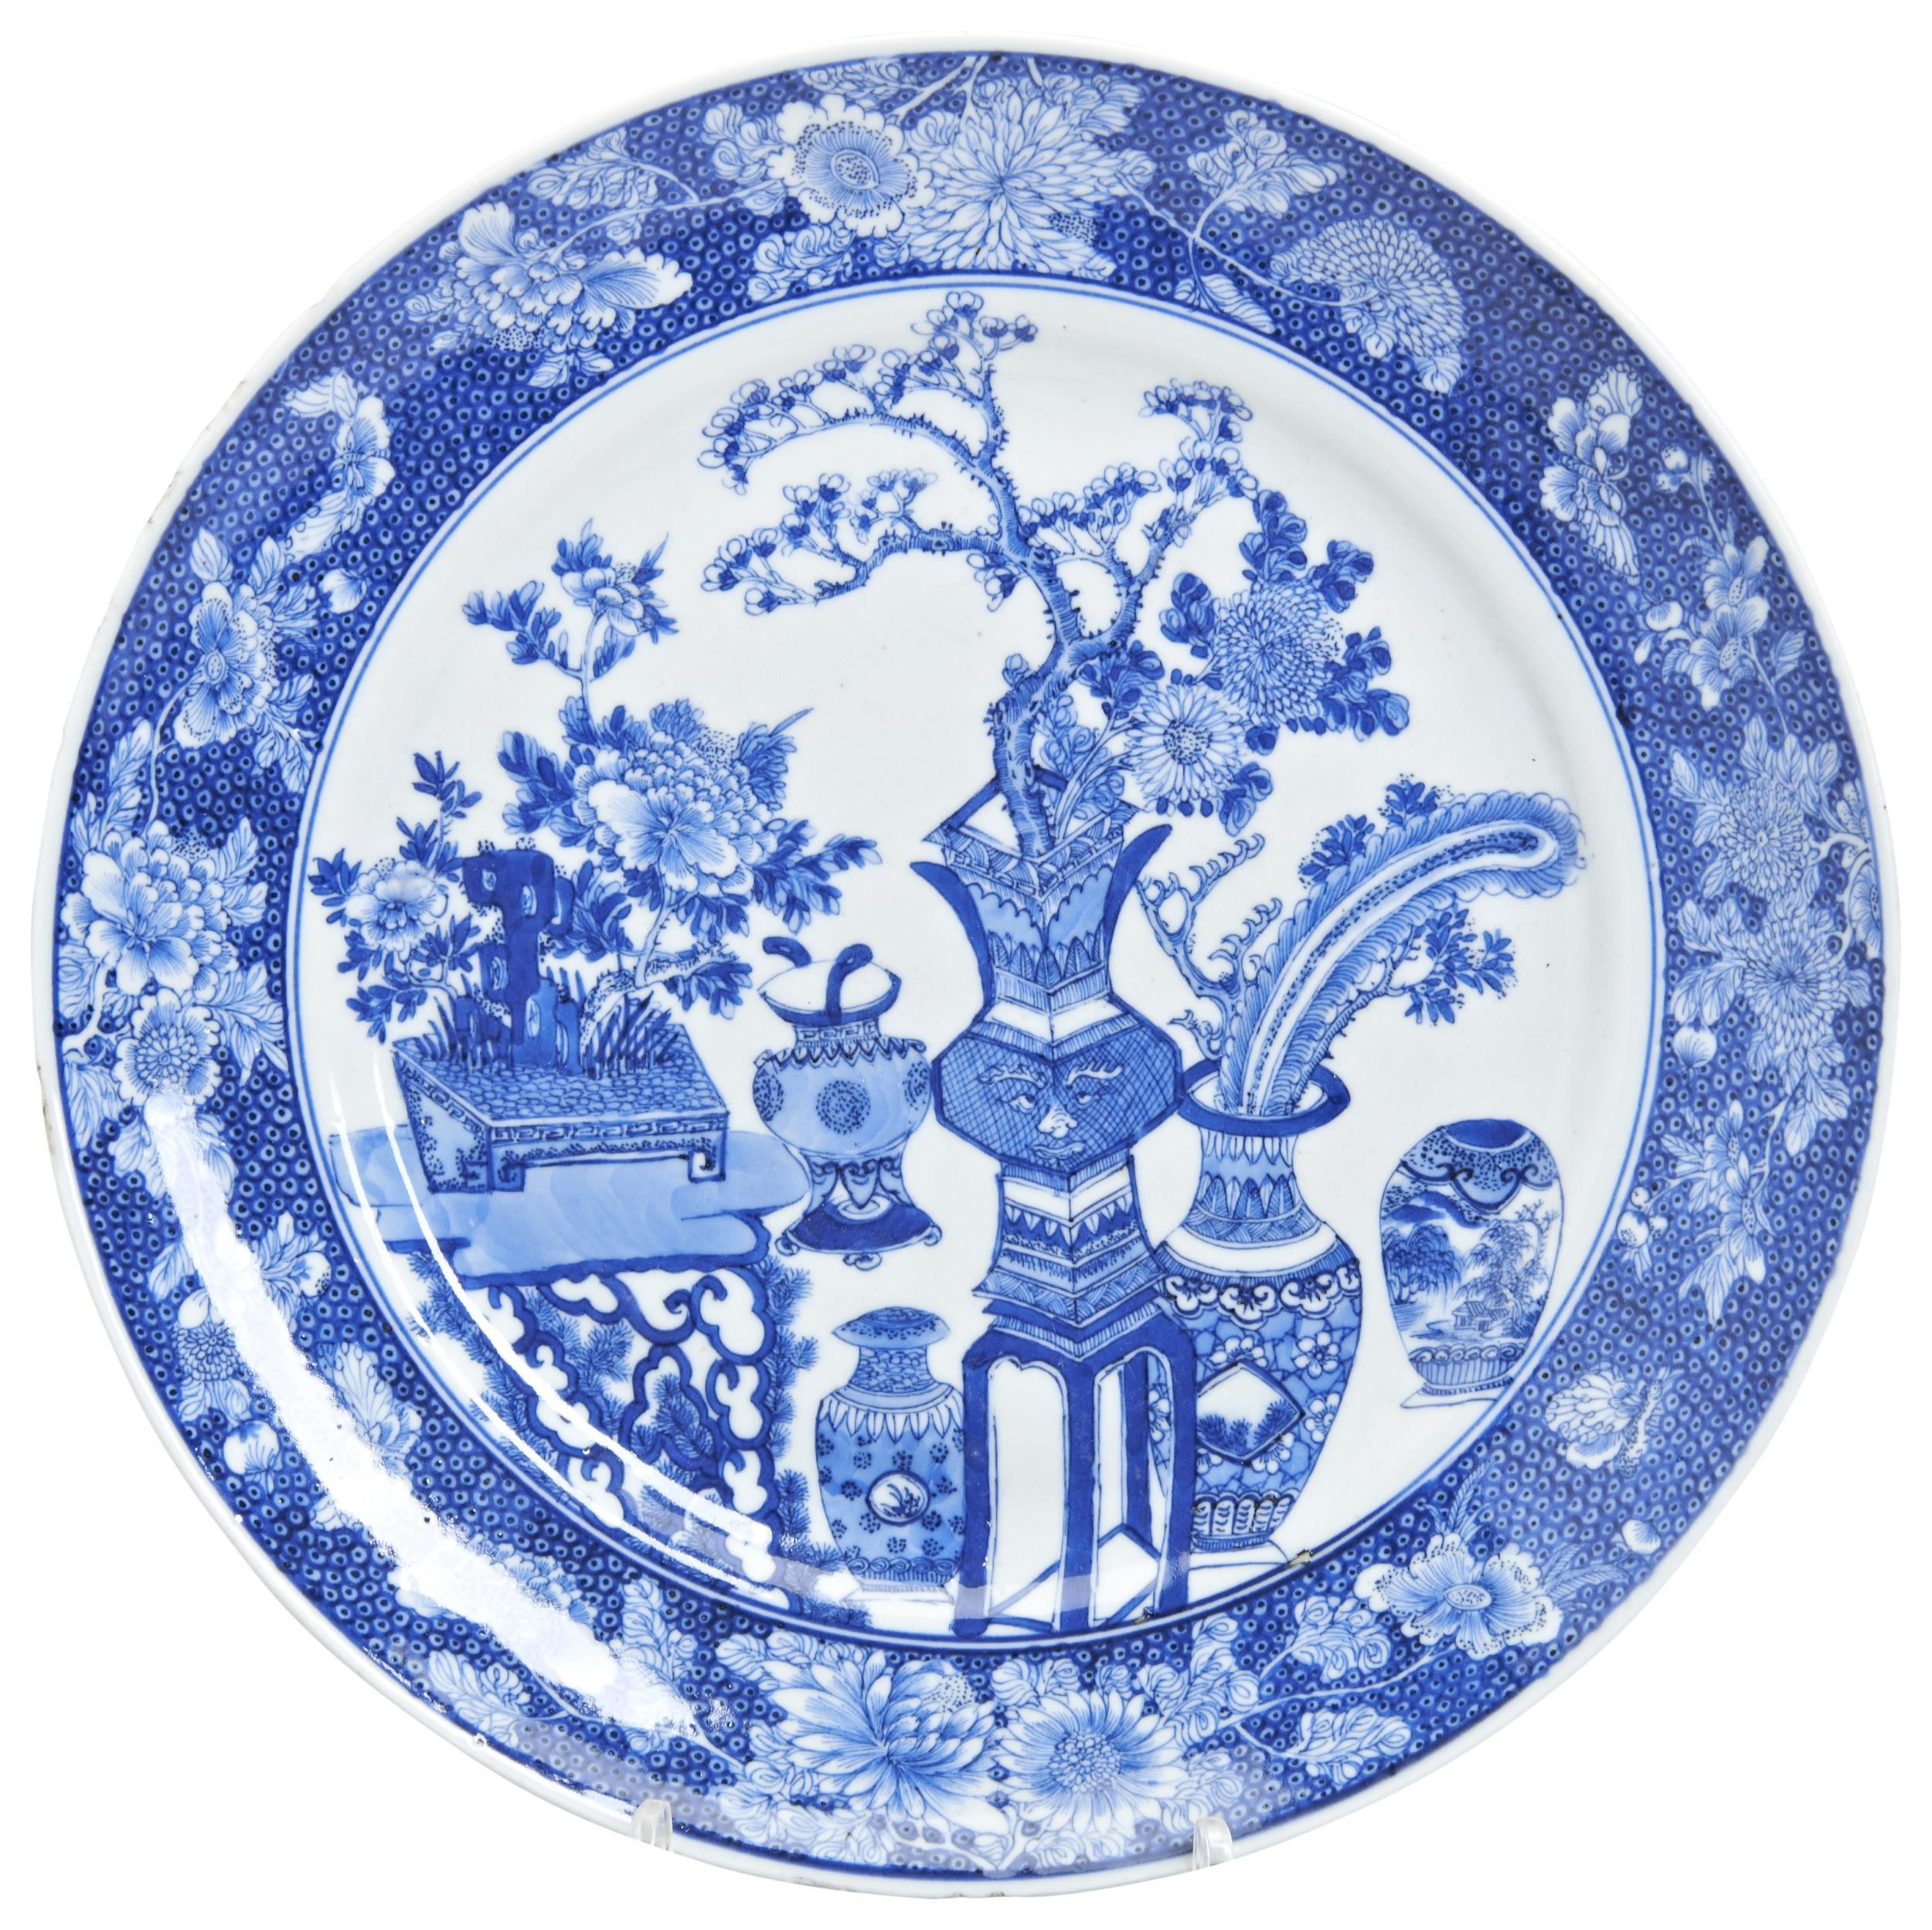 A BLUE AND WHITE PORCELAIN DISH  QING DYNASTY, QIANLONG MARK AND PERIOD  interior painted with